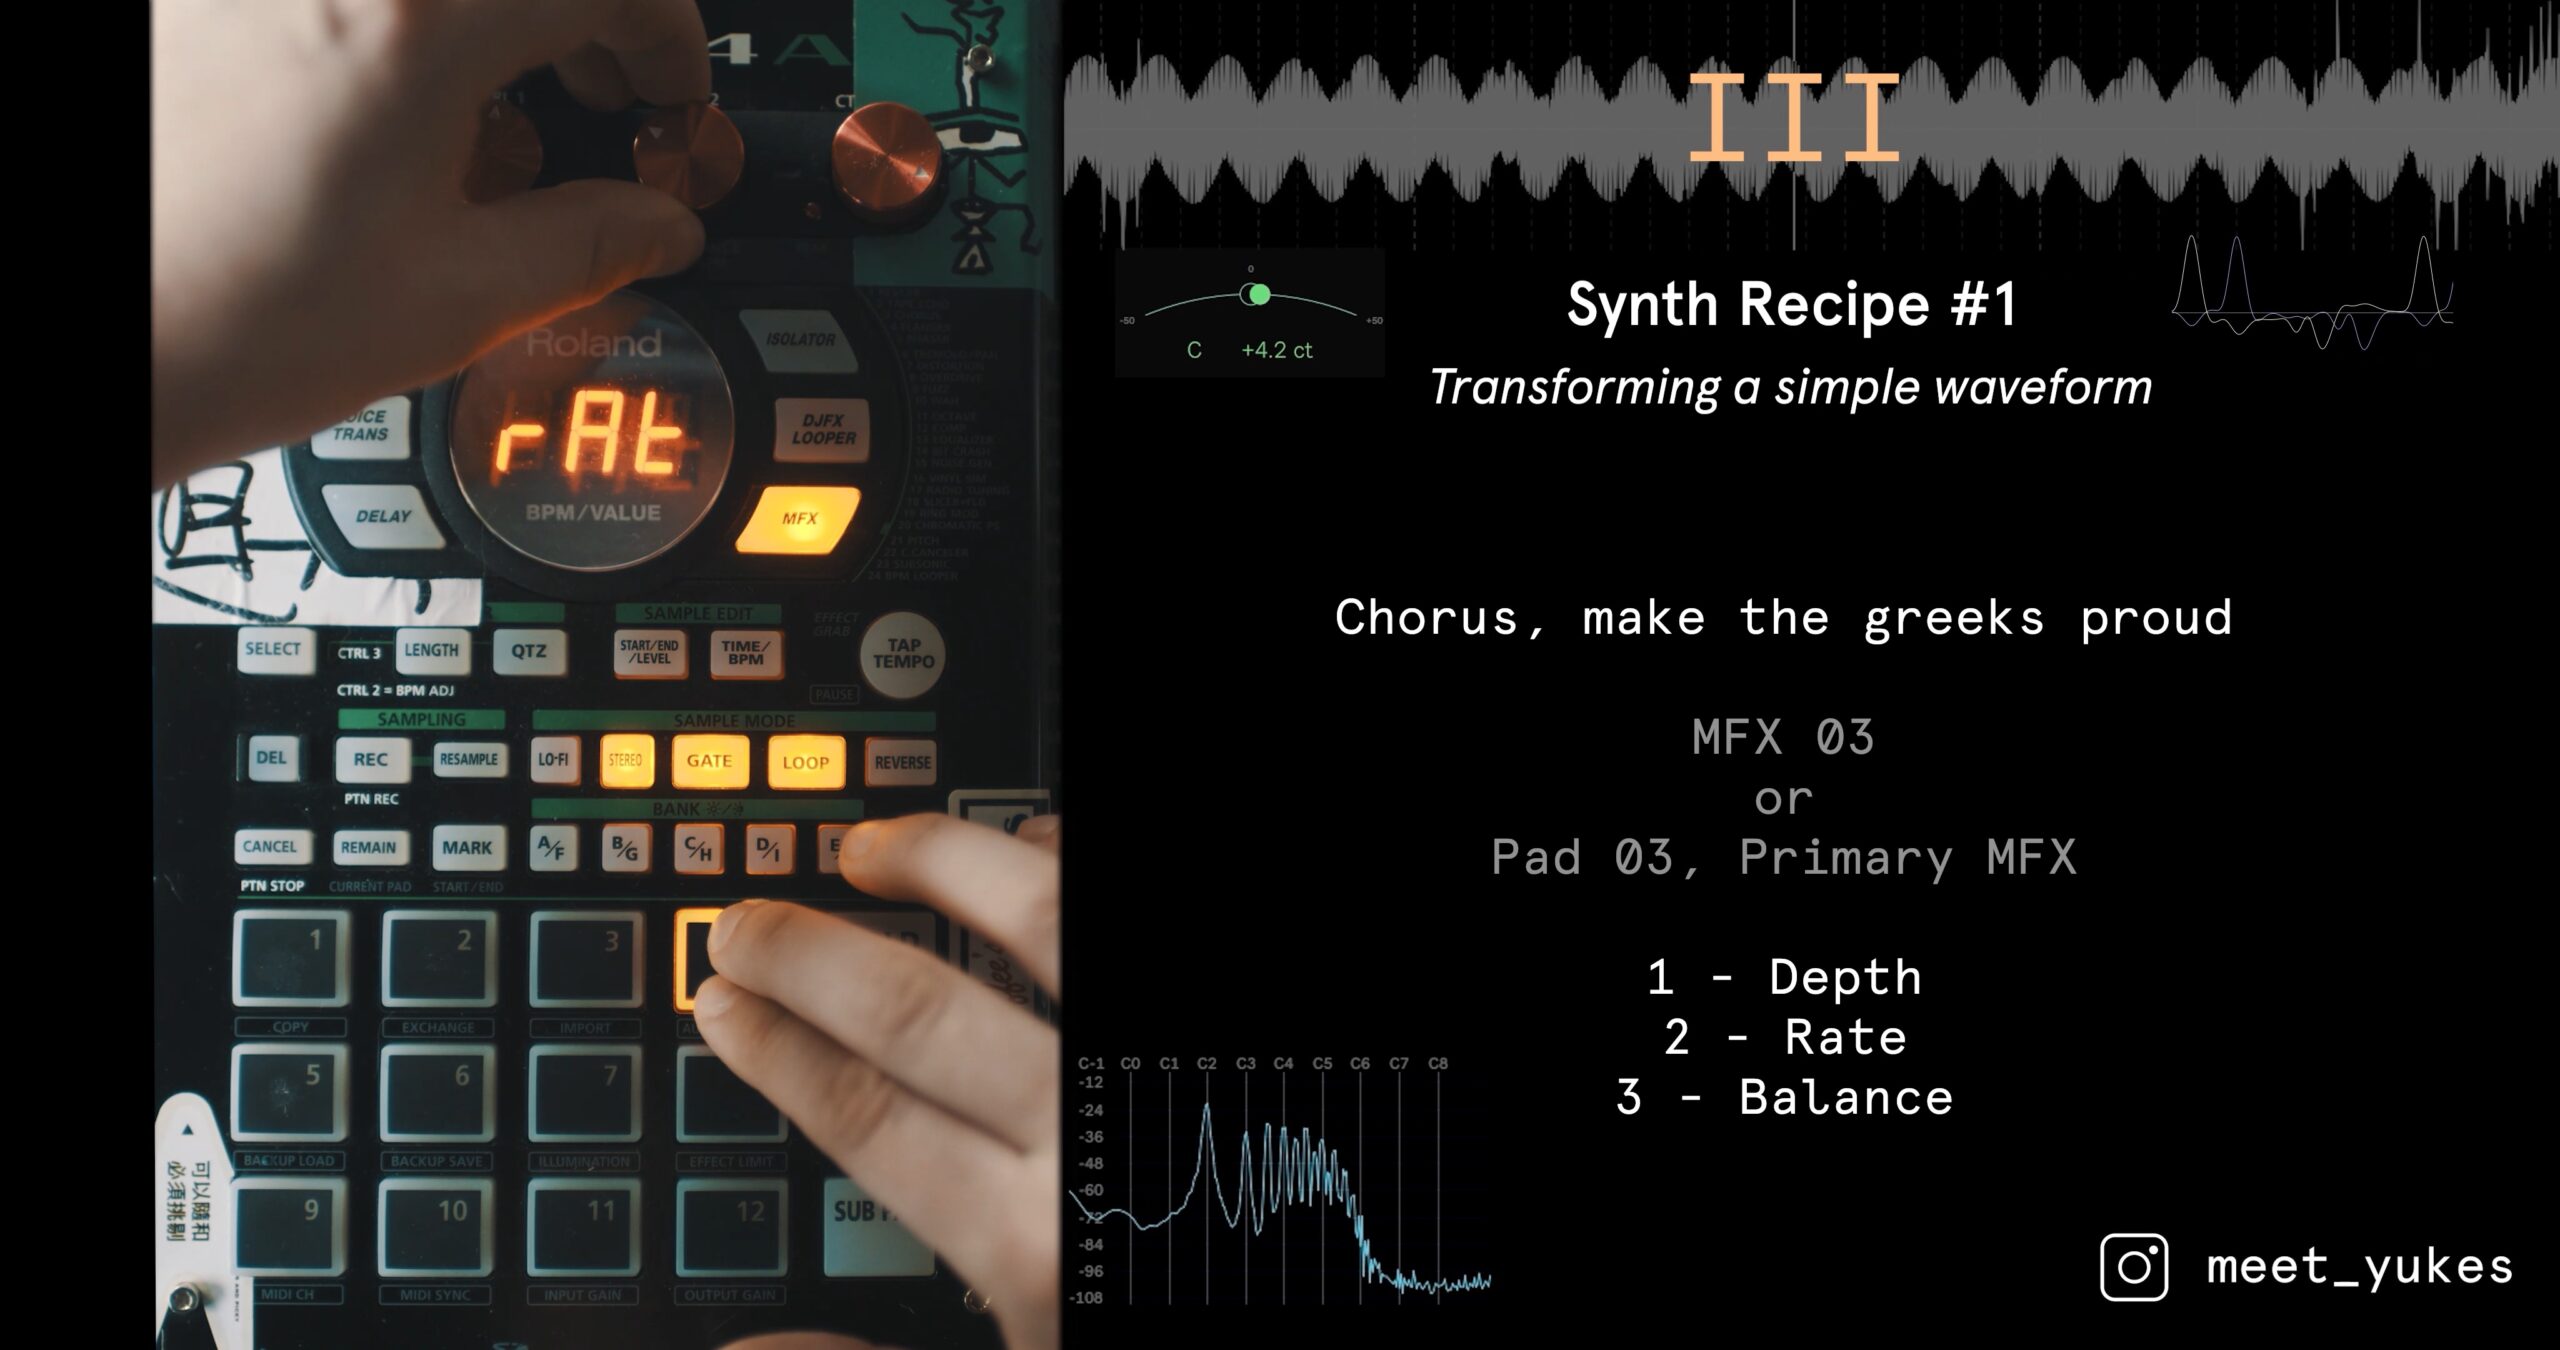 Using the SP404 sampler as a synth